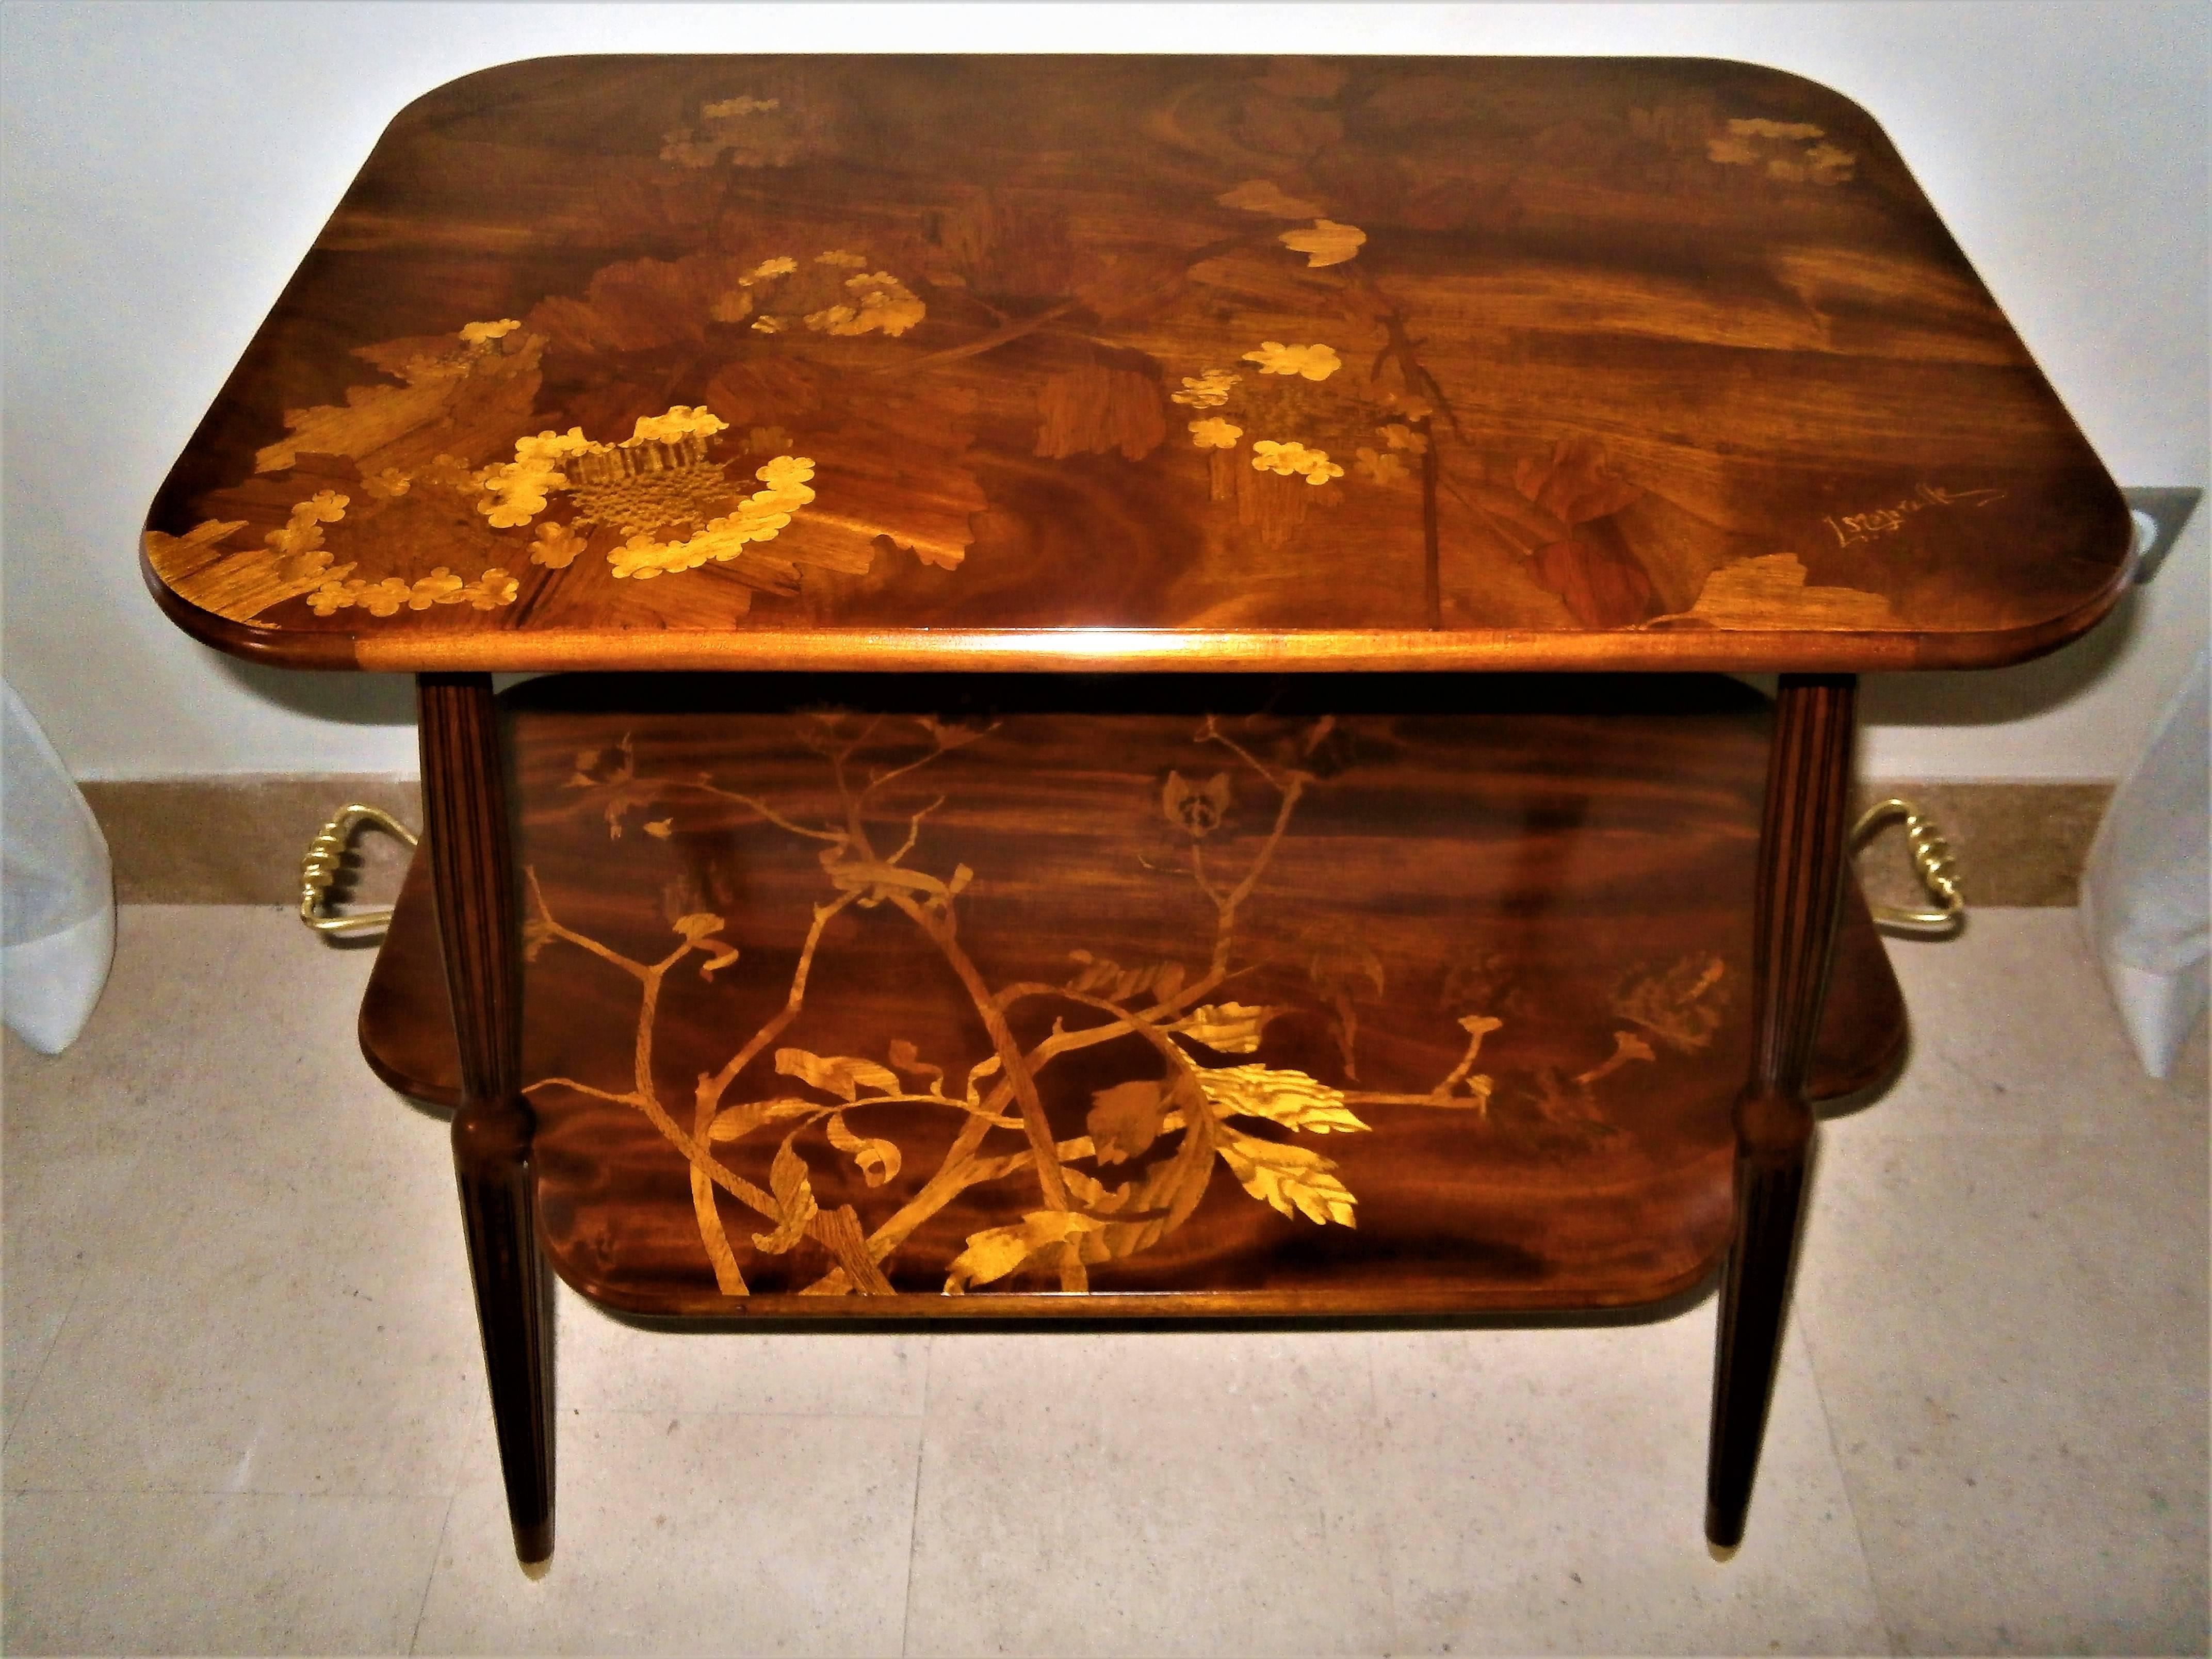 Signed by Louis Majorelle, this unique French Art Nouveau marquetry table featuring leaves and flowering berce des près.
Nancy, France, circa 1900.
Handles and legs sabots in gilt bronze.
Excellent restored antique condition.
Dimensions: 90 cm x